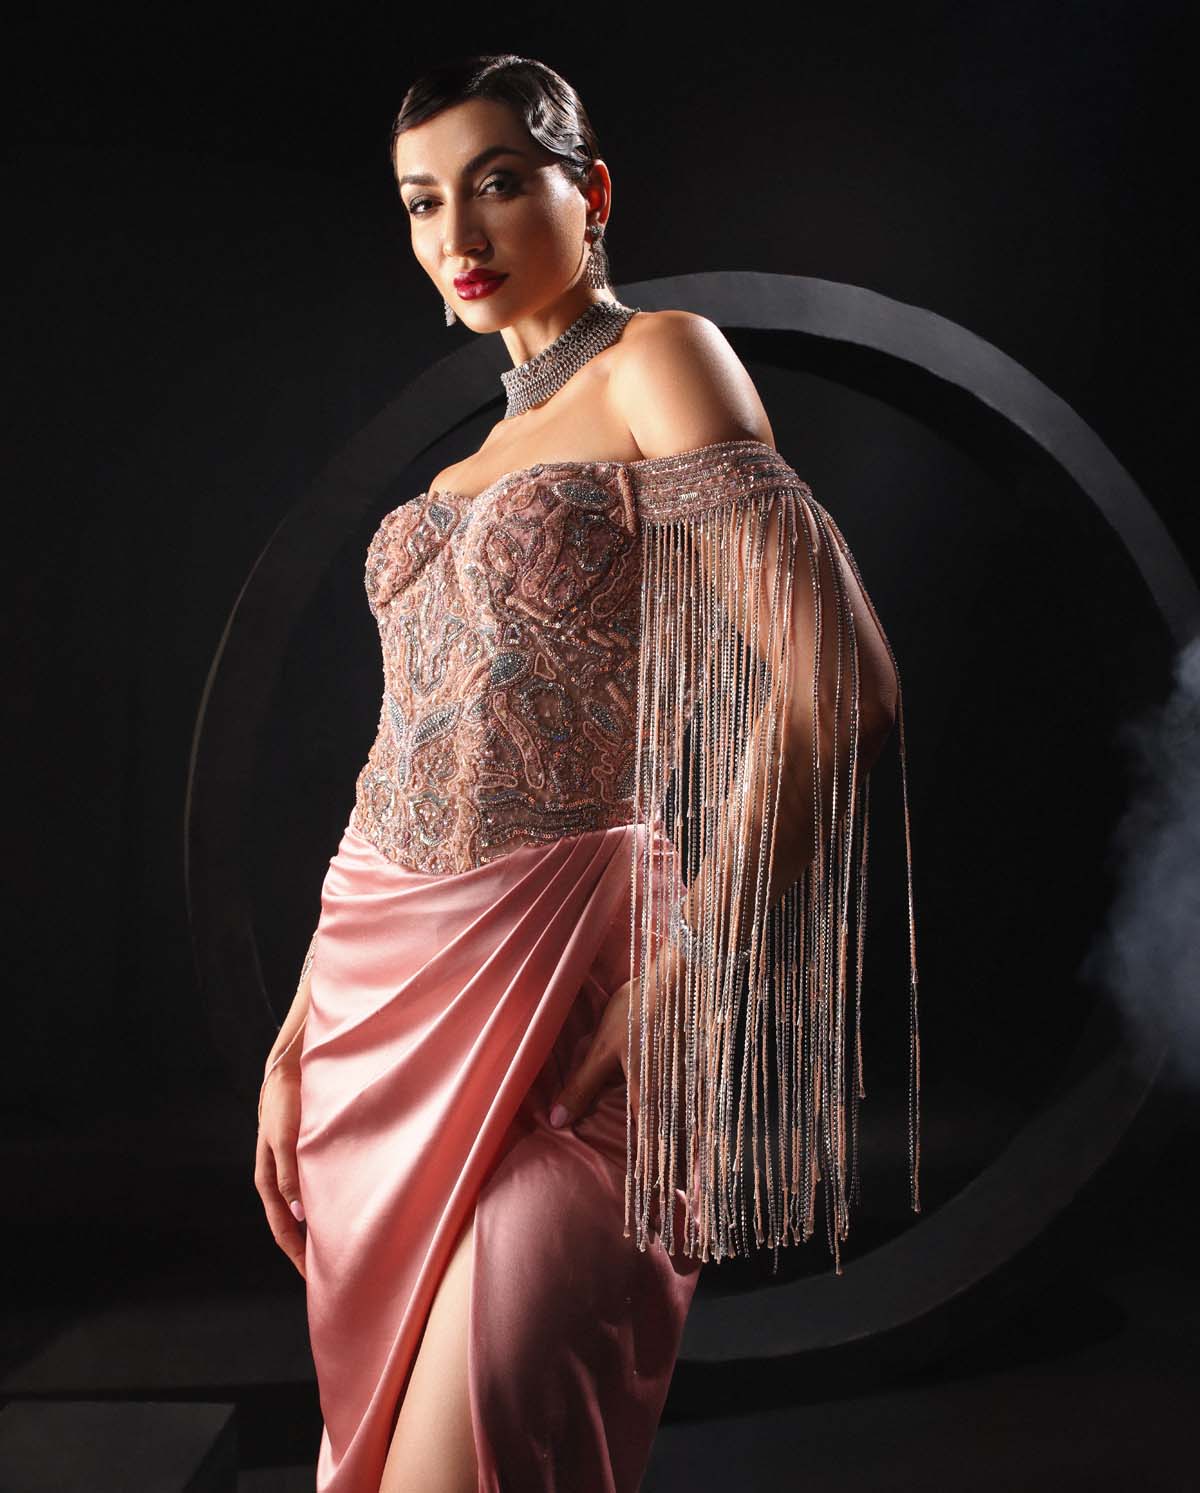 Exquisite Satin Gown with Hand-Embroidery & Tassels